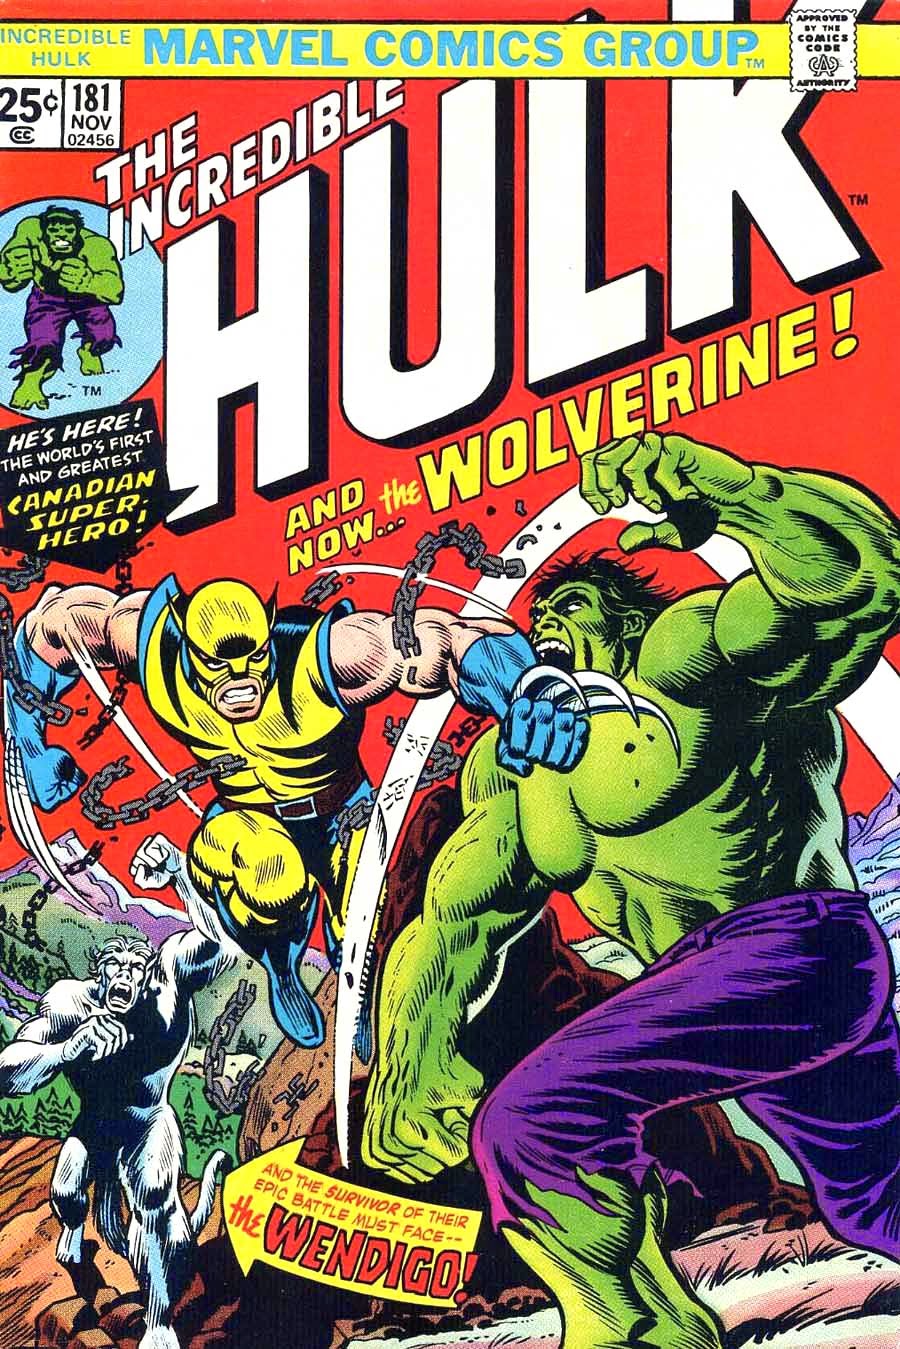 Incredible Hulk #181 marvel key issue 1970s bronze age comic book cover - 1st appearance Wolverine